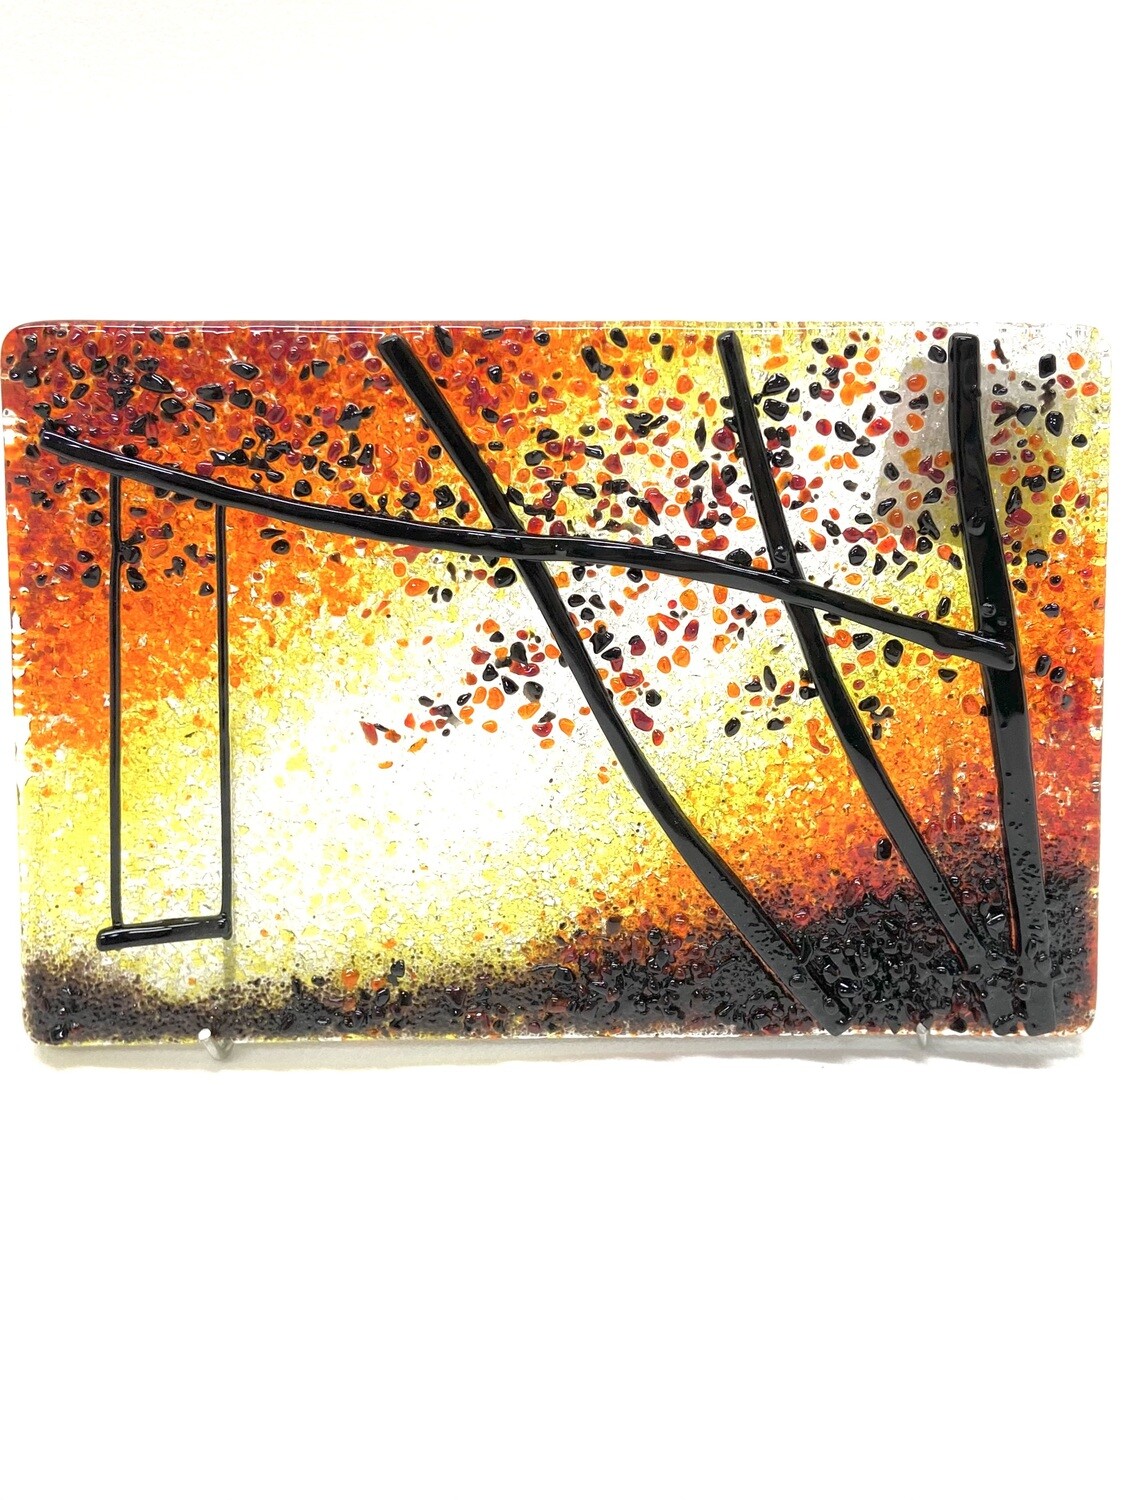 Lonesome Swing on Red- Brent Harding Fused Glass